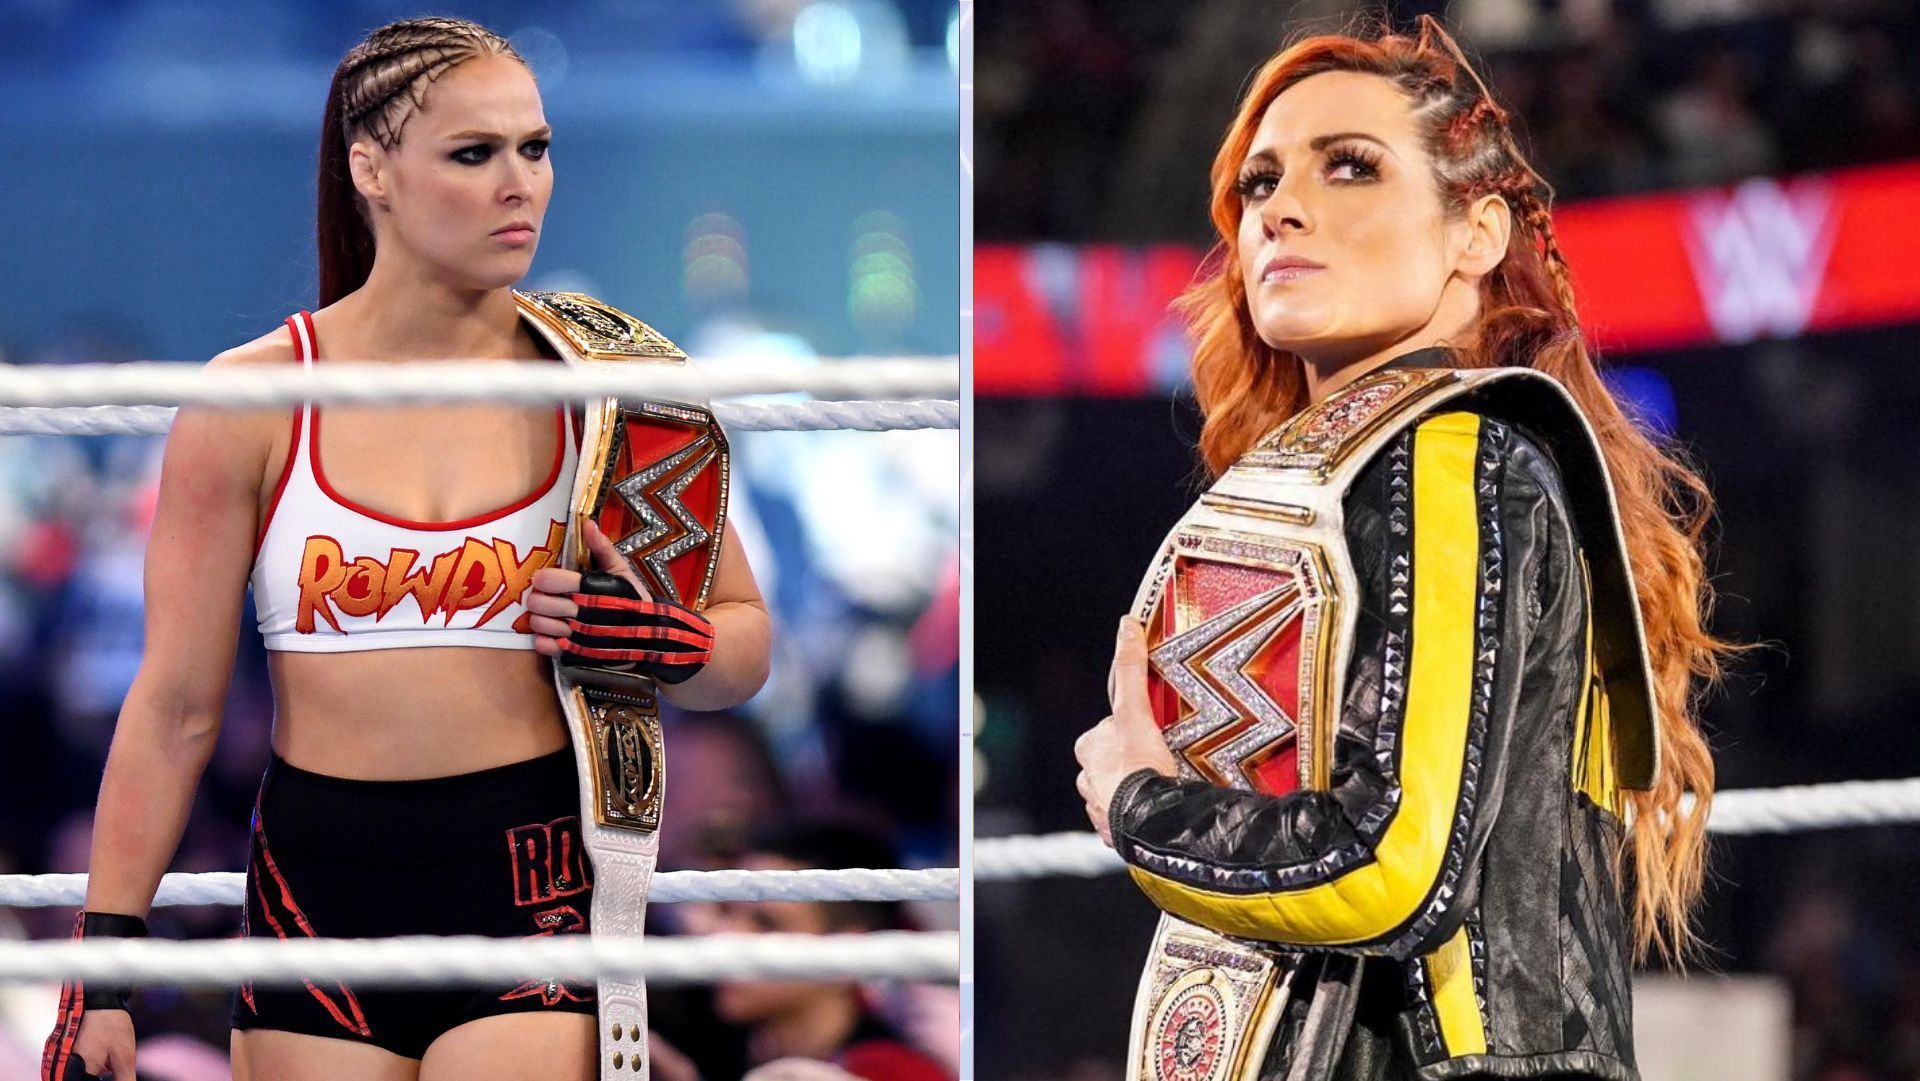 Ronda Rousey and Becky Lynch are among the highest paid